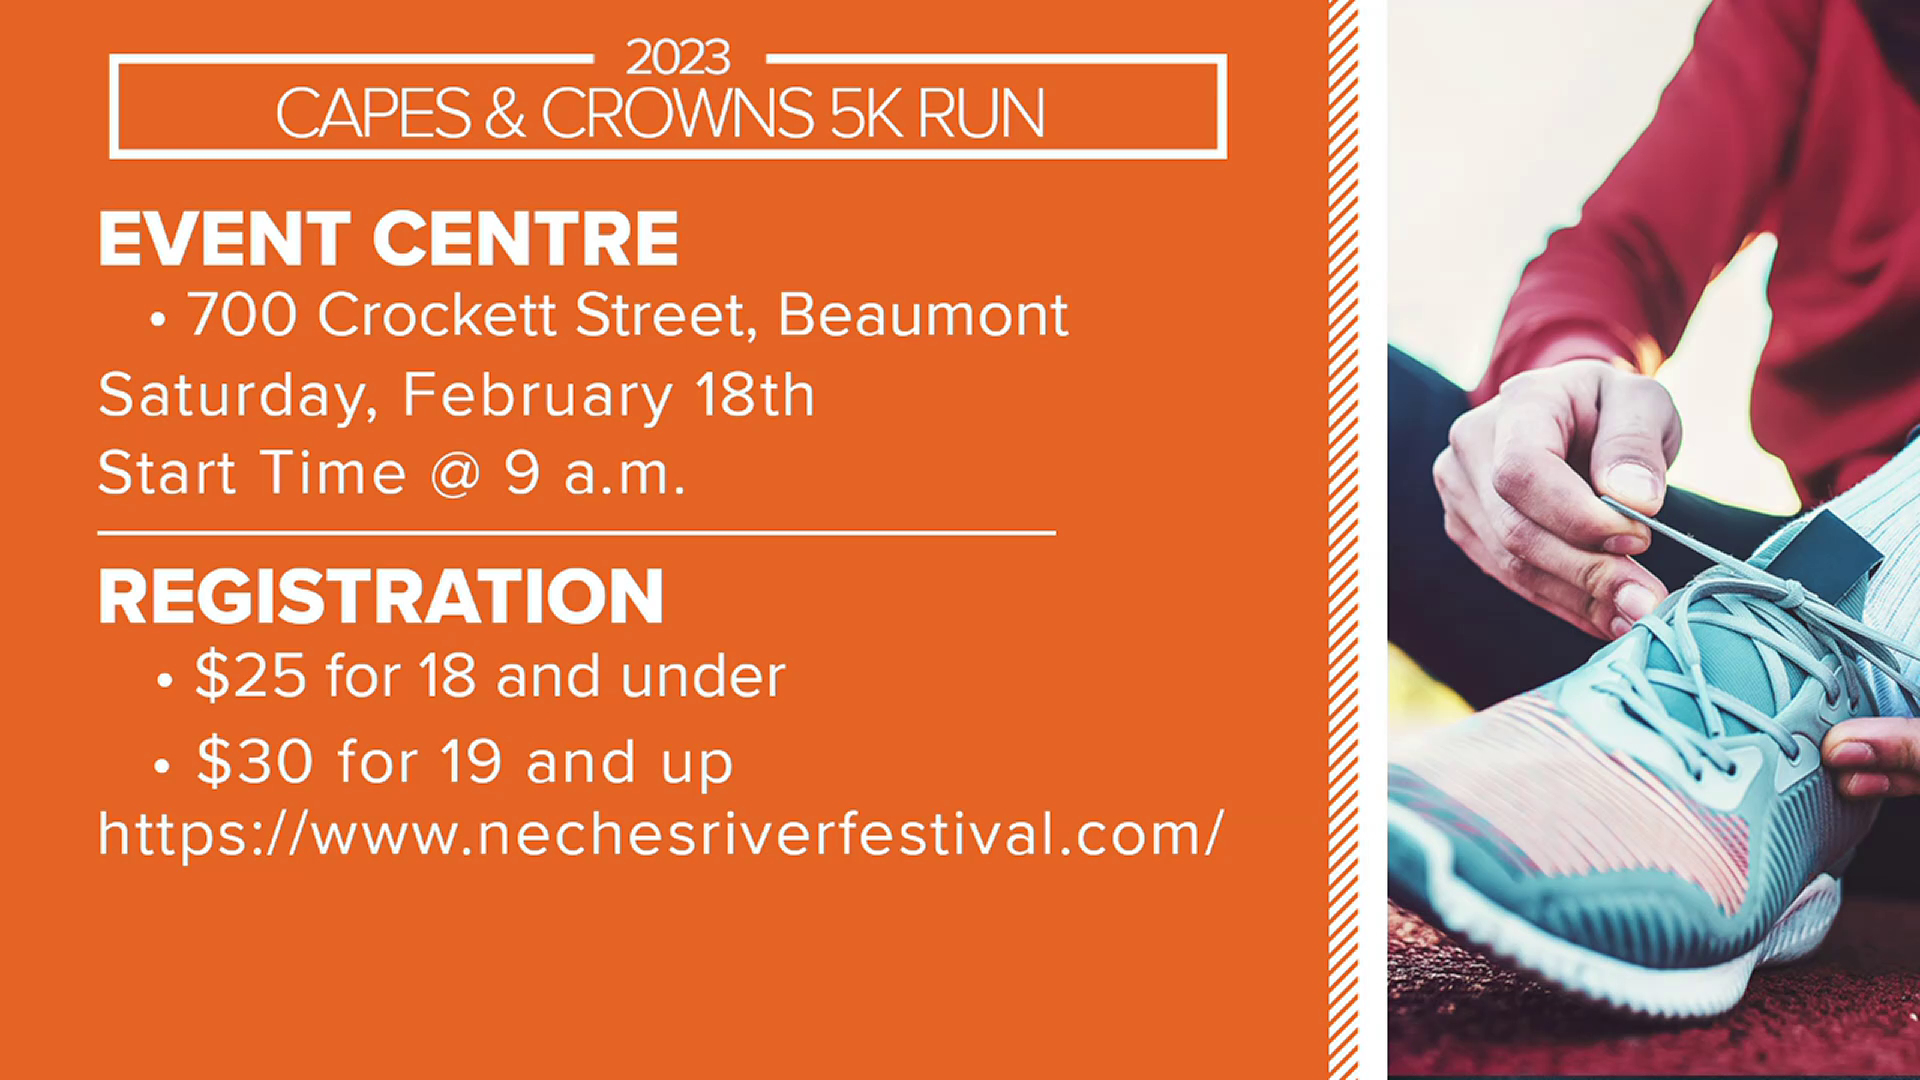 The Capes & Crowns 5K Run is Saturday morning at 9 a.m. in downtown Beaumont. Register at NechesRiverFestival.com/nrf-5k